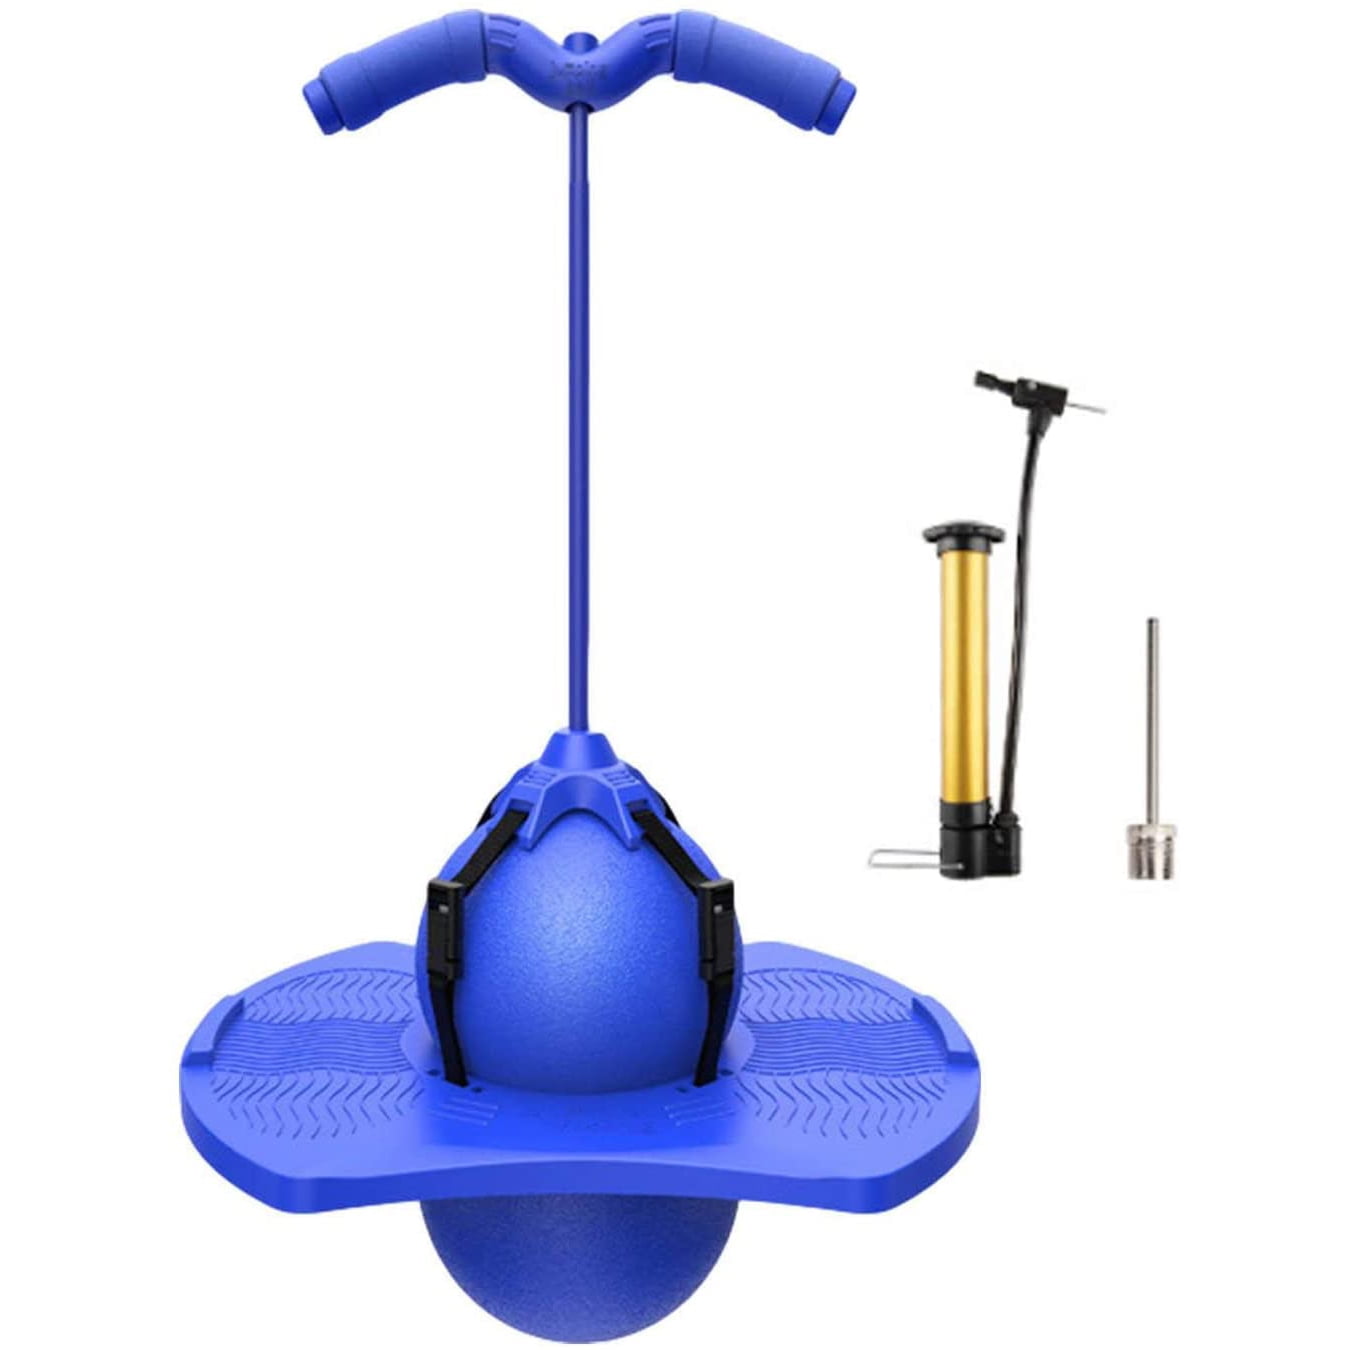 Willingfun Pogo Ball with Handle with Pump and Strong Grip Deck Great Gift for Kids Blue Pogo Stick for Kids Ages 6 & Up 